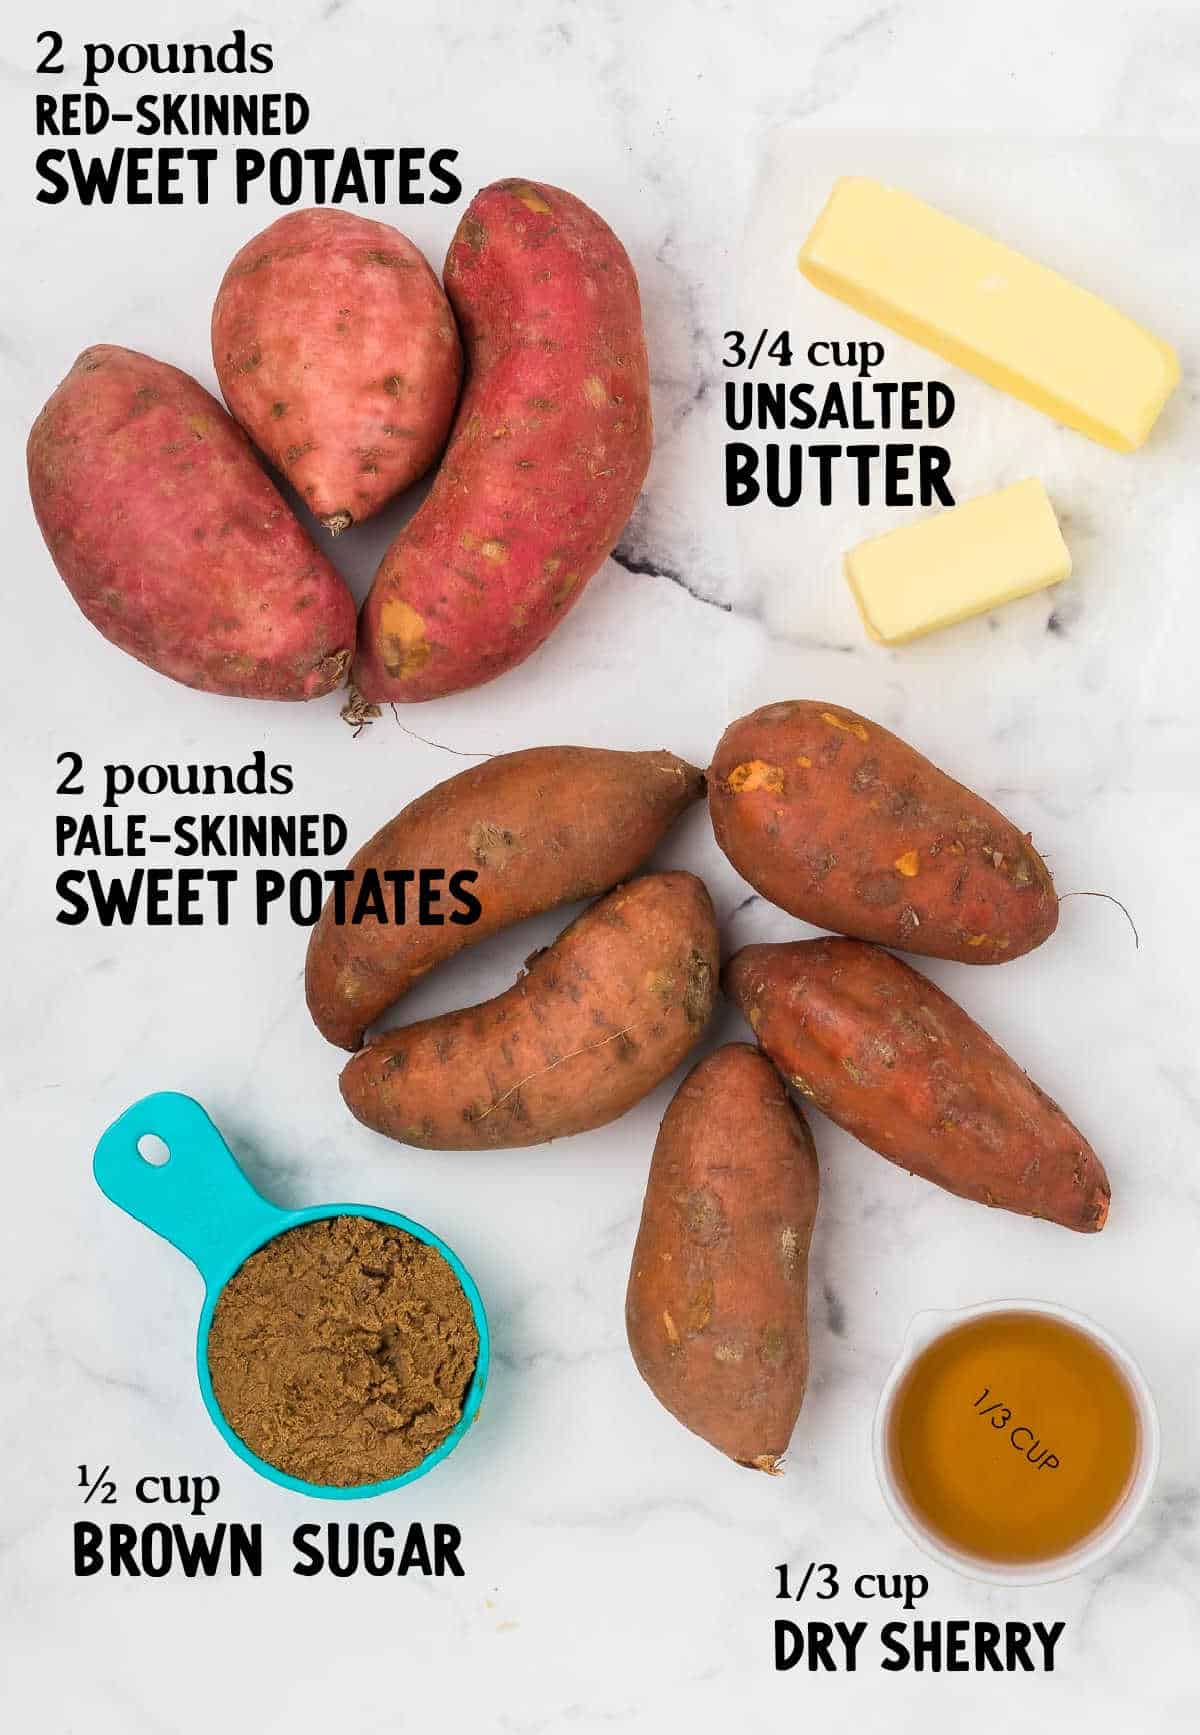 How Many Sweet Potatoes is 3 Cups? 